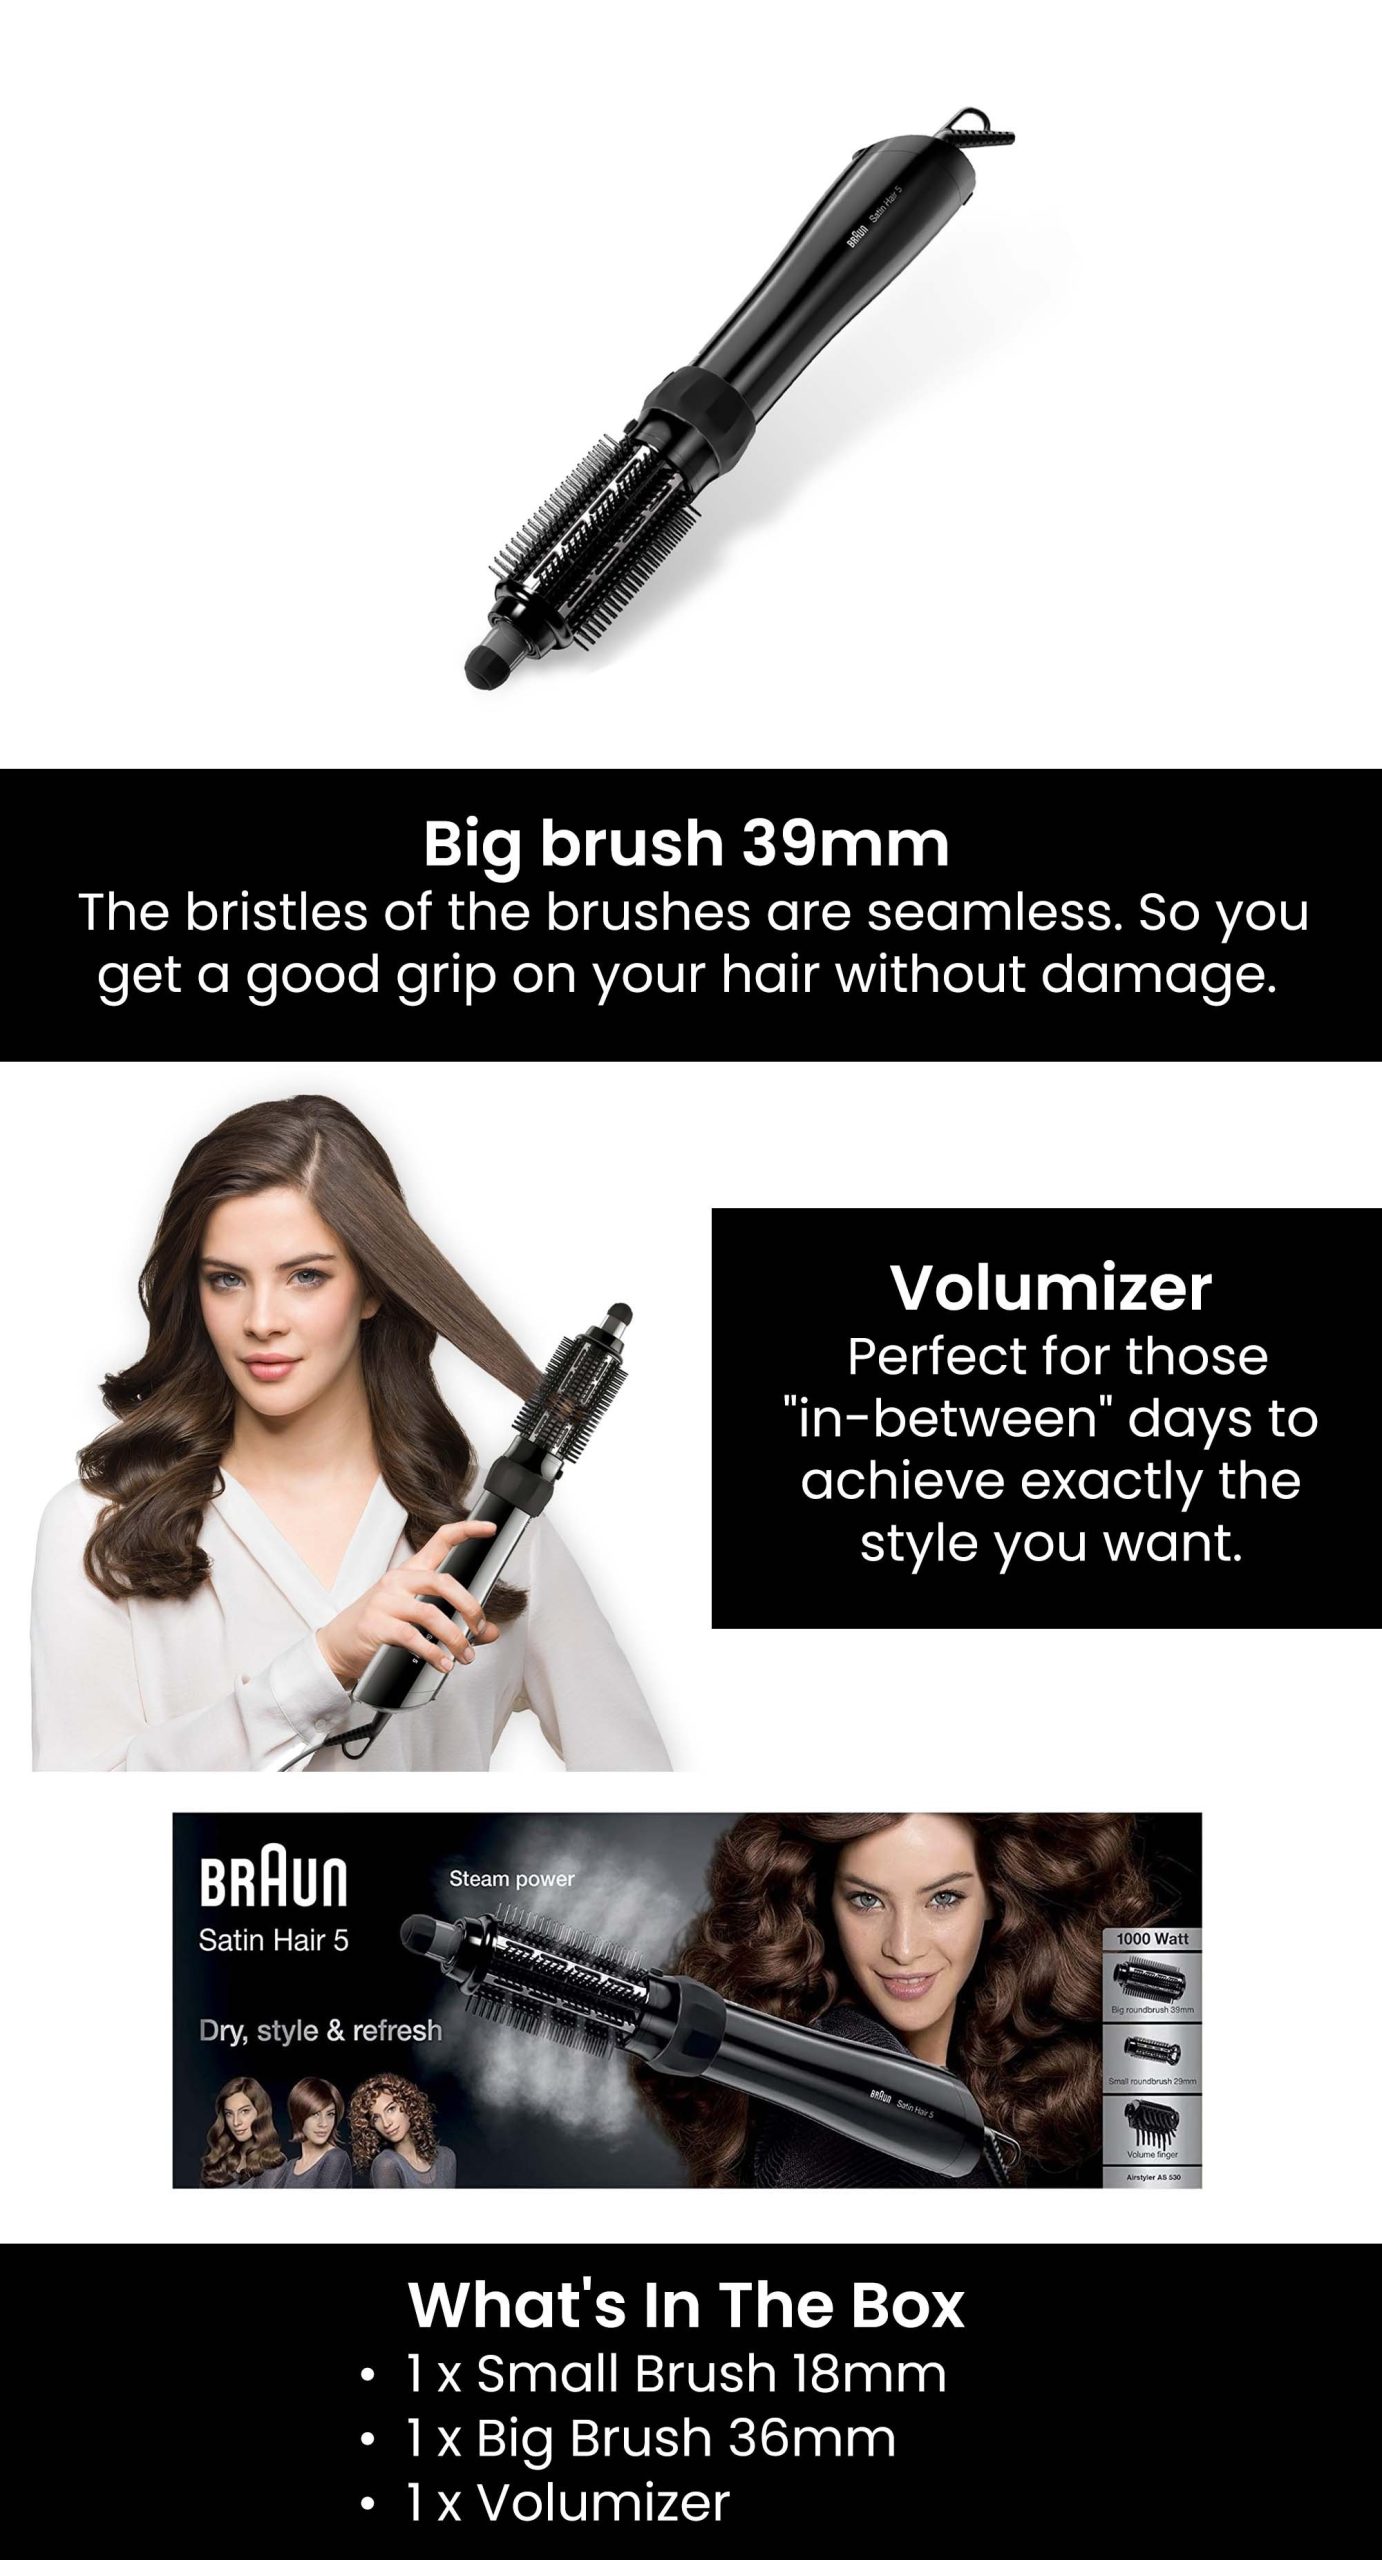 Powerful steam function releases vapour to style and restyle Even heat distribution won’t dry your hair out Specially designed filter mesh prevents hair from getting entangled and avoids breakage 3 heat/ airflow settings to avoid overheating A cold shot button provides the perfect finish for setting your style